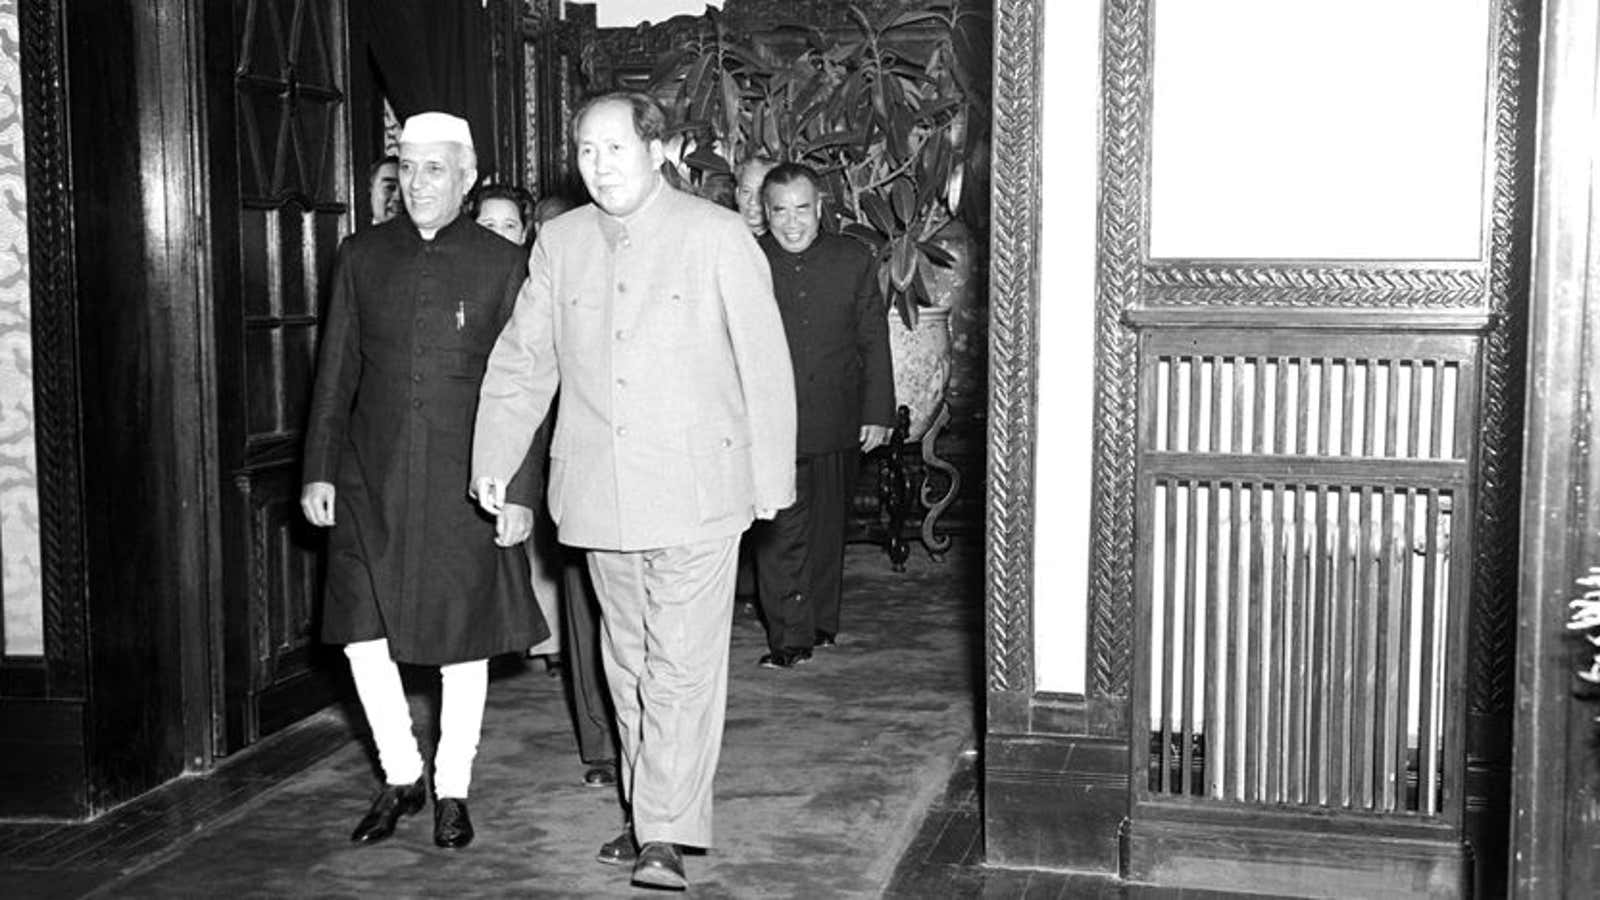 Jawaharlal Nehru being led to a banquet hall by Mao Zedong.